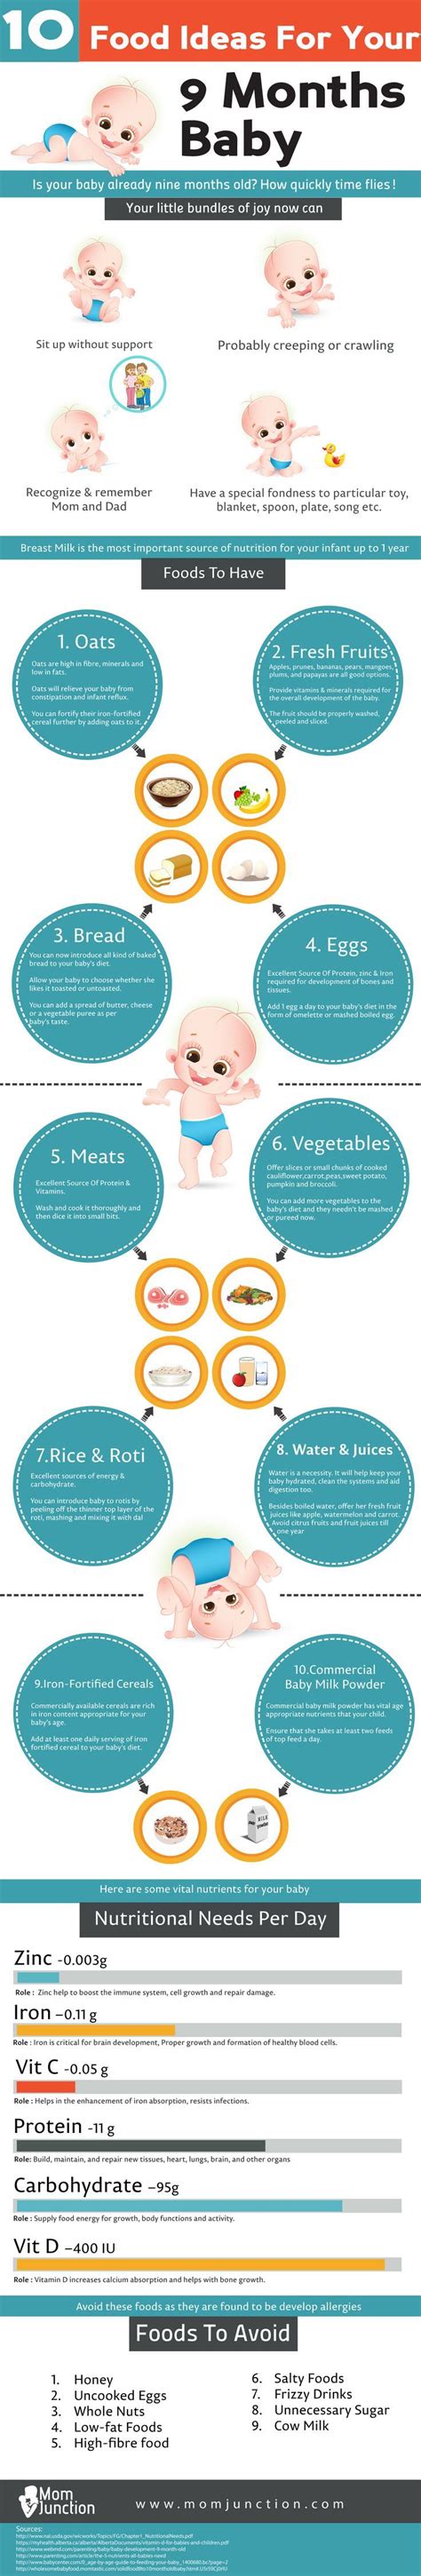 The ninth month is a very crucial and exciting month for the baby as they learn to crawl, play independently, and even start communicating a little bit. 9 Month Baby Food: Top 10 Food Ideas And 4 Interesting ...